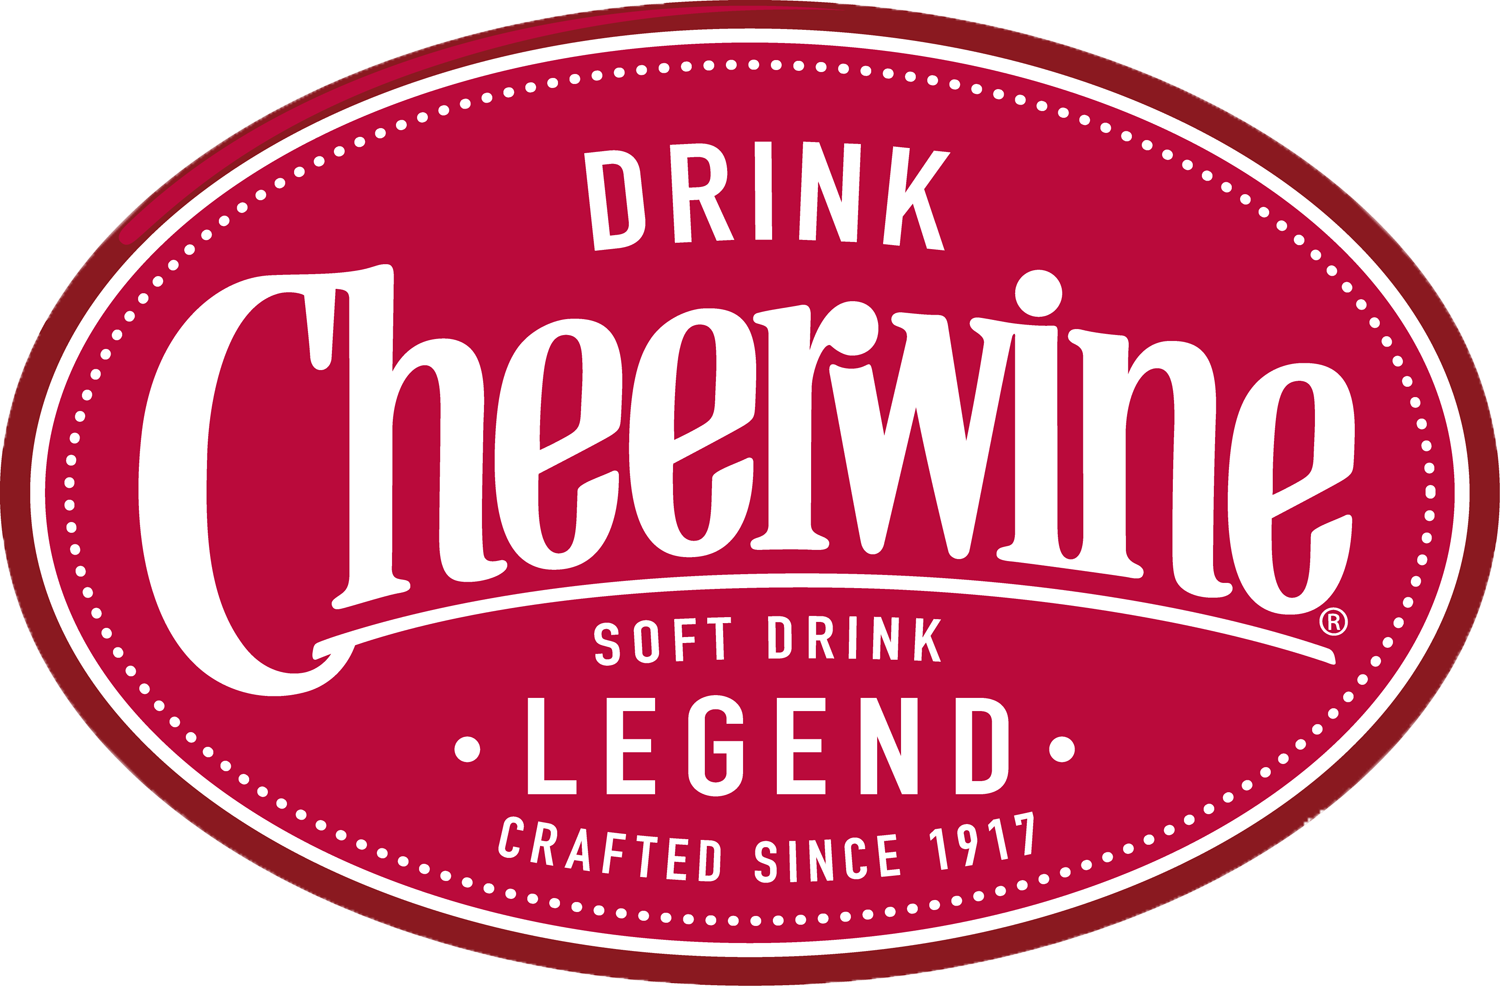 Thank You To Our Sponsors Tito's Handmade Vodka, Cheerwine, - Cheerwine Soft Drink - 4 Pack, 12 Fl Oz Bottles (1500x986), Png Download